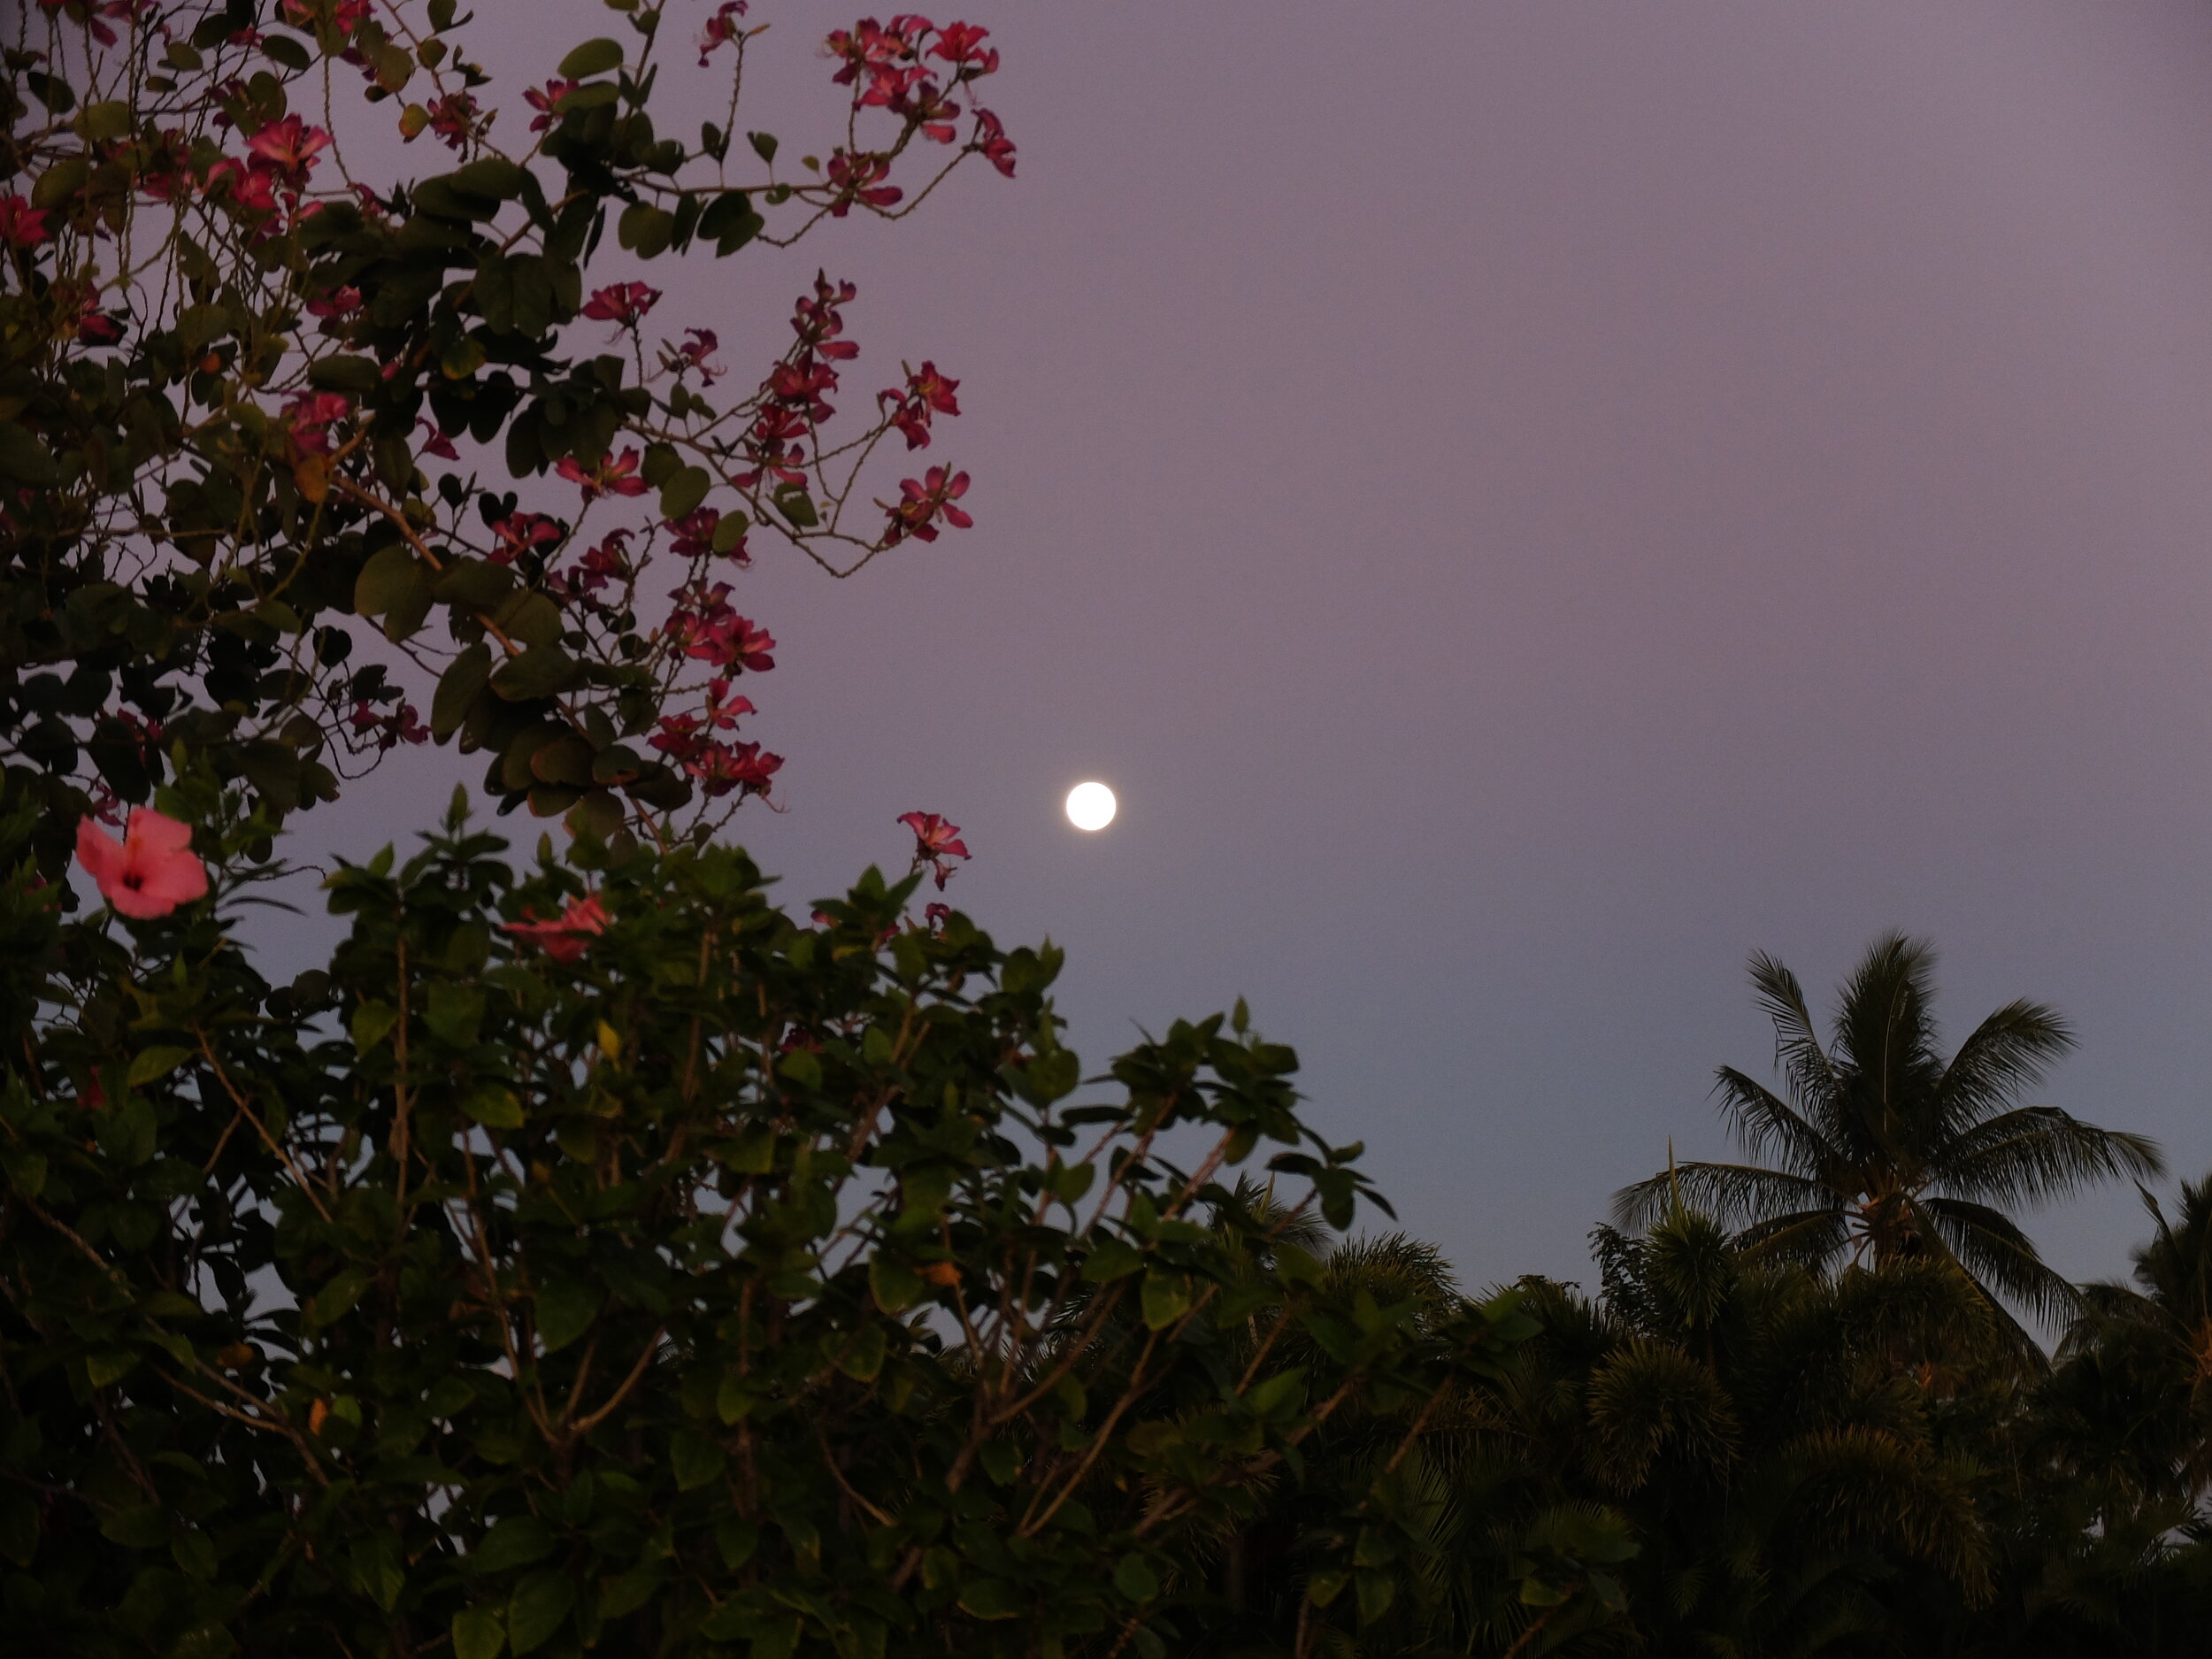 Sunrise &amp; full moonset, Hualālai between 6:50 AM &amp; 9:00 AM as we departed in the rainy mist. 